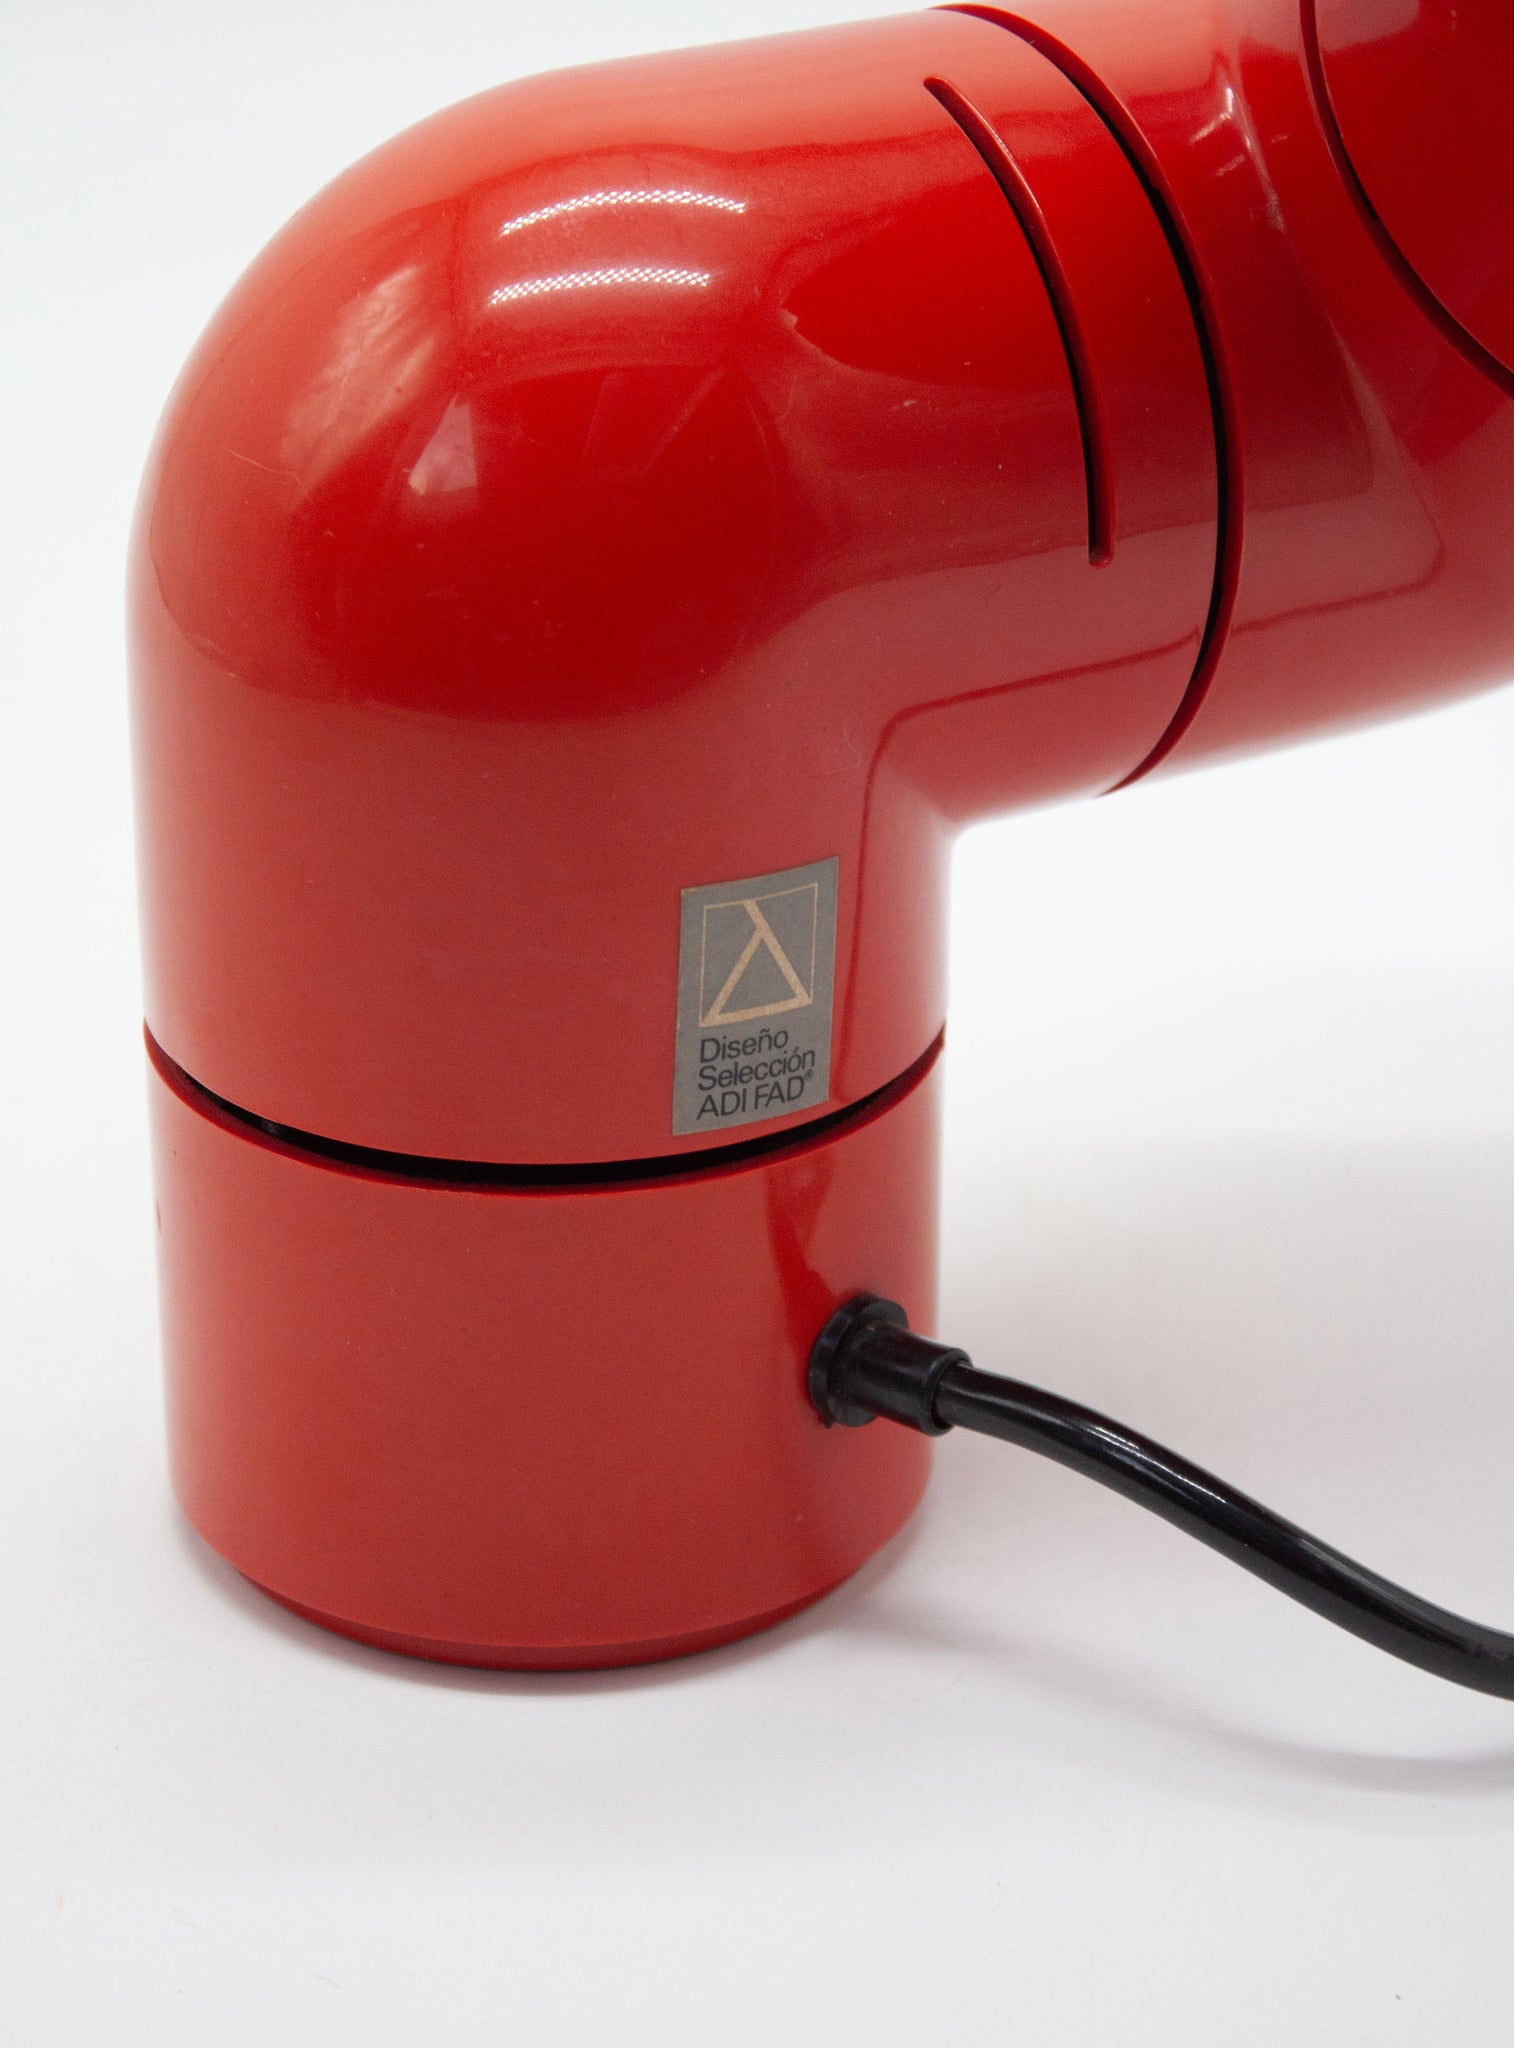 Santa & Cole Tatu Table Lamp by André Ricard (Red)